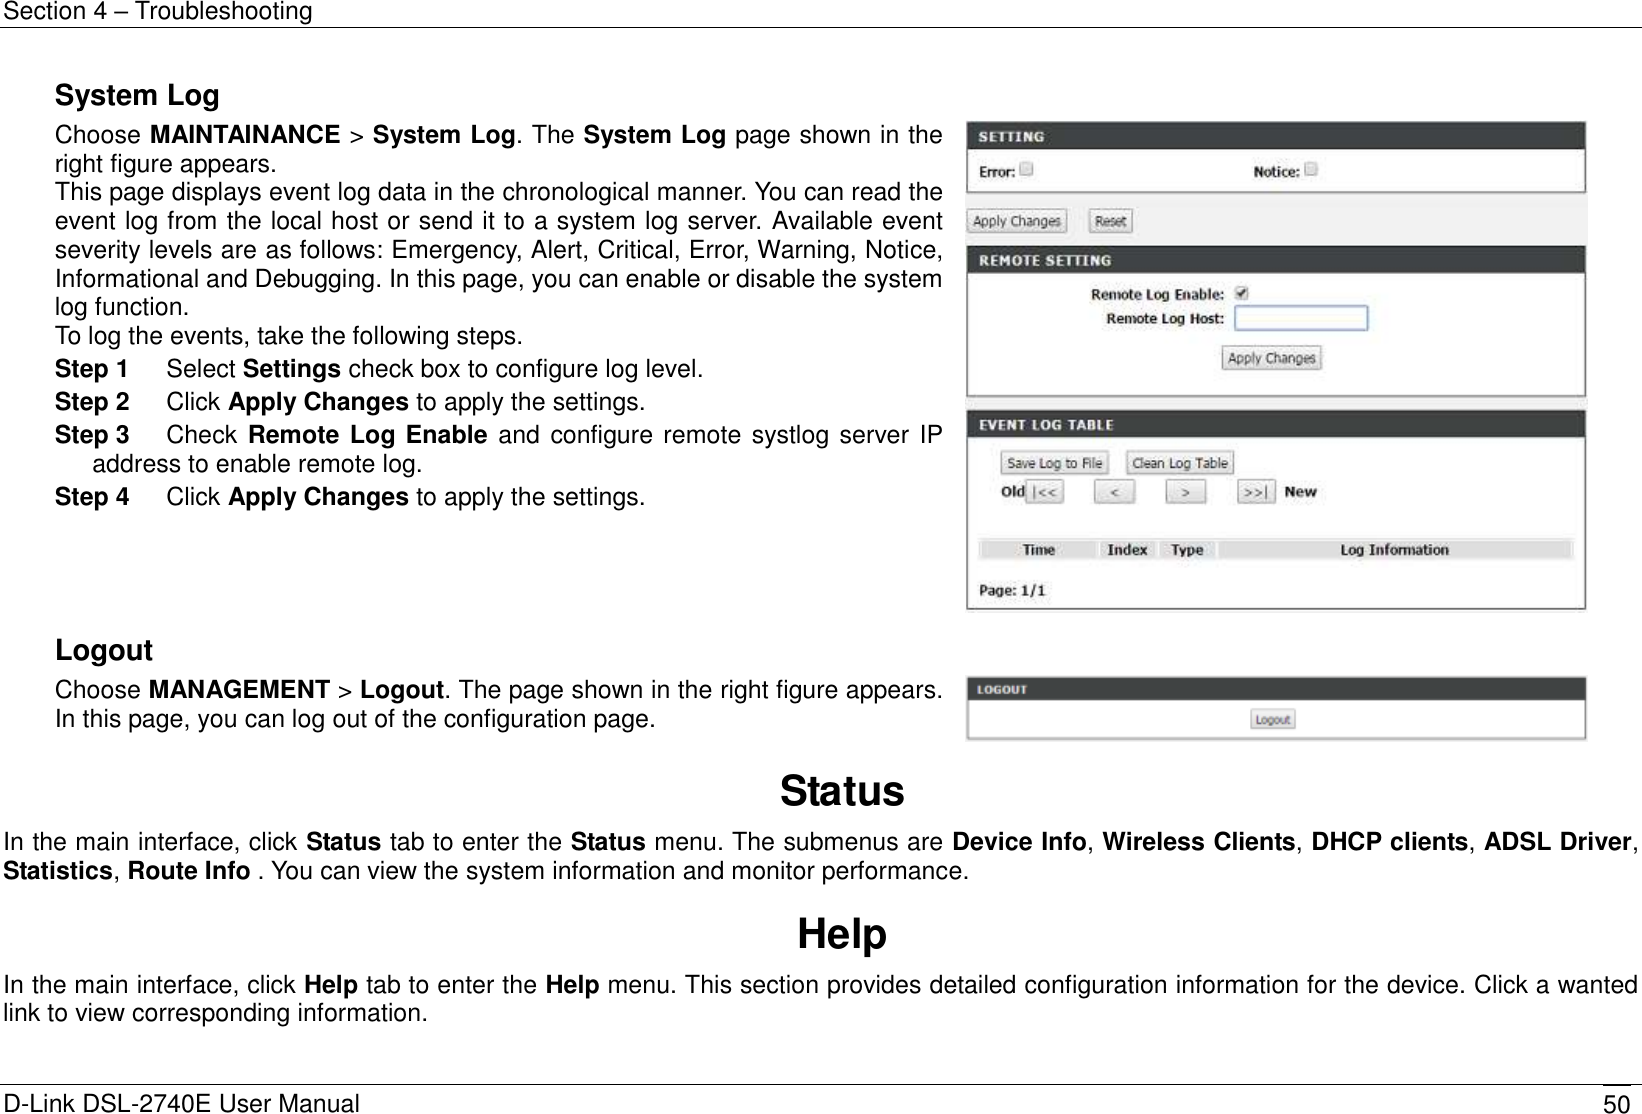 Section 4 – Troubleshooting D-Link DSL-2740E User Manual 50 System Log Choose MAINTAINANCE &gt; System Log. The System Log page shown in the right figure appears. This page displays event log data in the chronological manner. You can read the event log from the local host or send it to a system log server. Available event severity levels are as follows: Emergency, Alert, Critical, Error, Warning, Notice, Informational and Debugging. In this page, you can enable or disable the system log function. To log the events, take the following steps. Step 1  Select Settings check box to configure log level. Step 2  Click Apply Changes to apply the settings. Step 3  Check Remote Log Enable and  configure remote systlog server IP address to enable remote log. Step 4  Click Apply Changes to apply the settings.     Logout Choose MANAGEMENT &gt; Logout. The page shown in the right figure appears. In this page, you can log out of the configuration page.    Status In the main interface, click Status tab to enter the Status menu. The submenus are Device Info, Wireless Clients, DHCP clients, ADSL Driver,   Statistics, Route Info . You can view the system information and monitor performance. Help In the main interface, click Help tab to enter the Help menu. This section provides detailed configuration information for the device. Click a wanted link to view corresponding information.